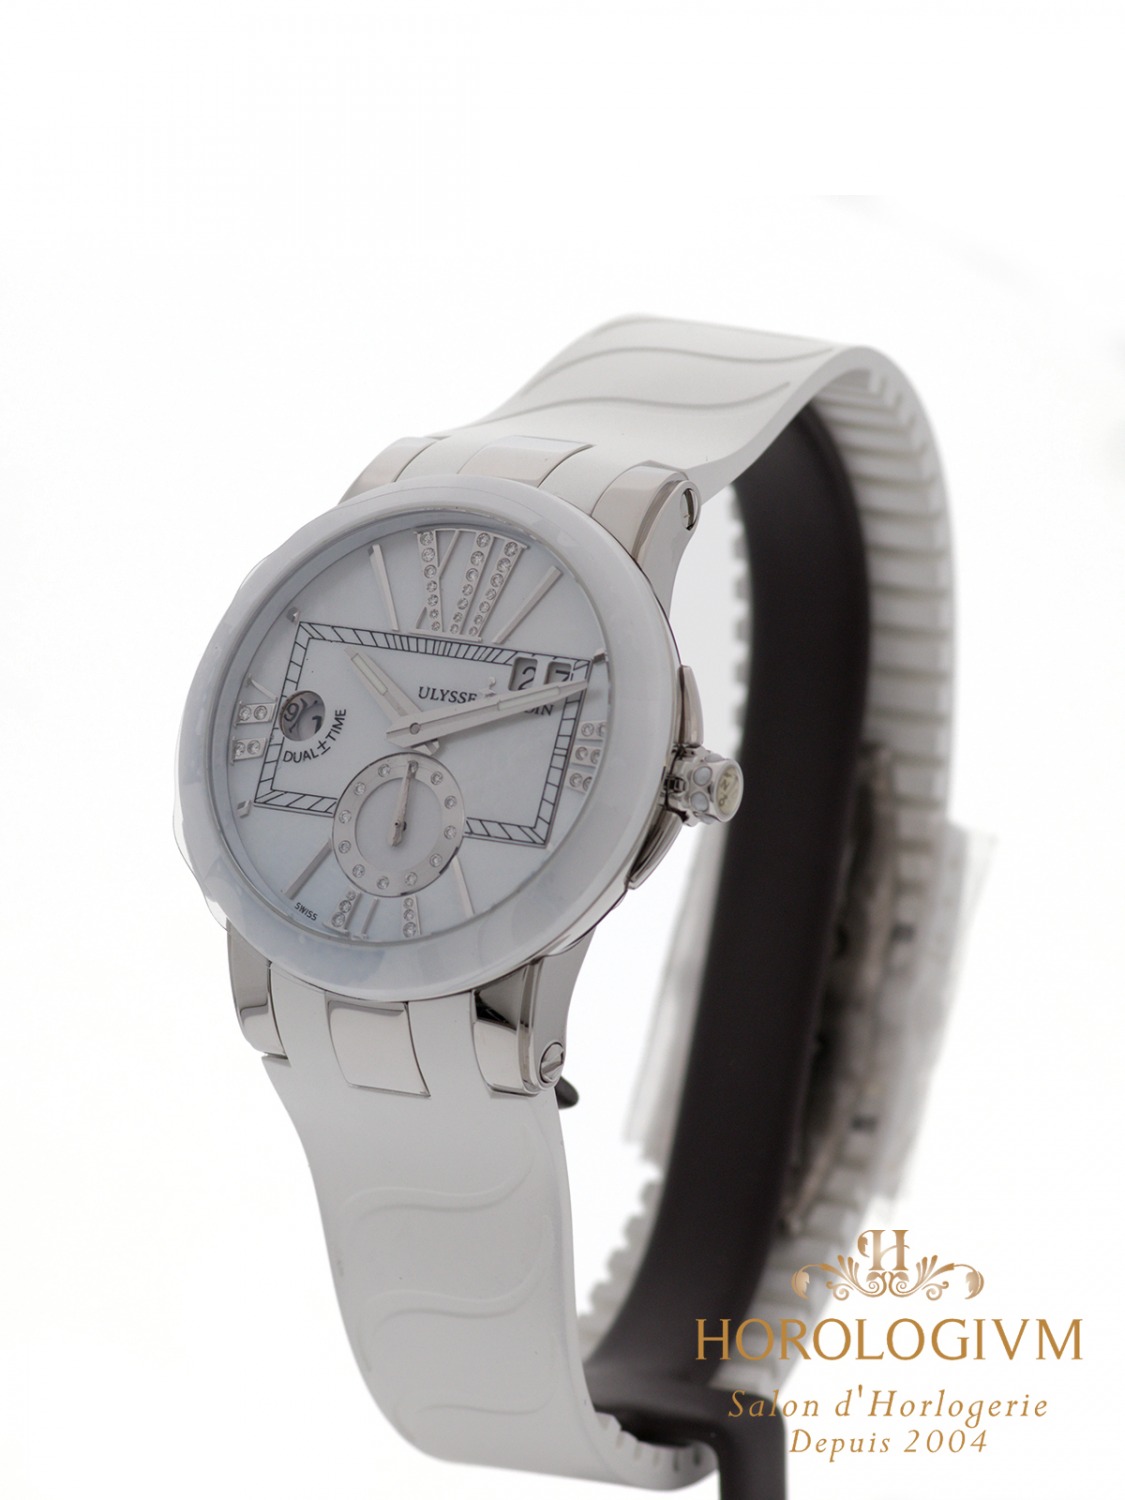 Ulysse Nardin Executive Dual Time 40MM Ref. 243-10 watch, silver (case) and white ceramic (bezel)